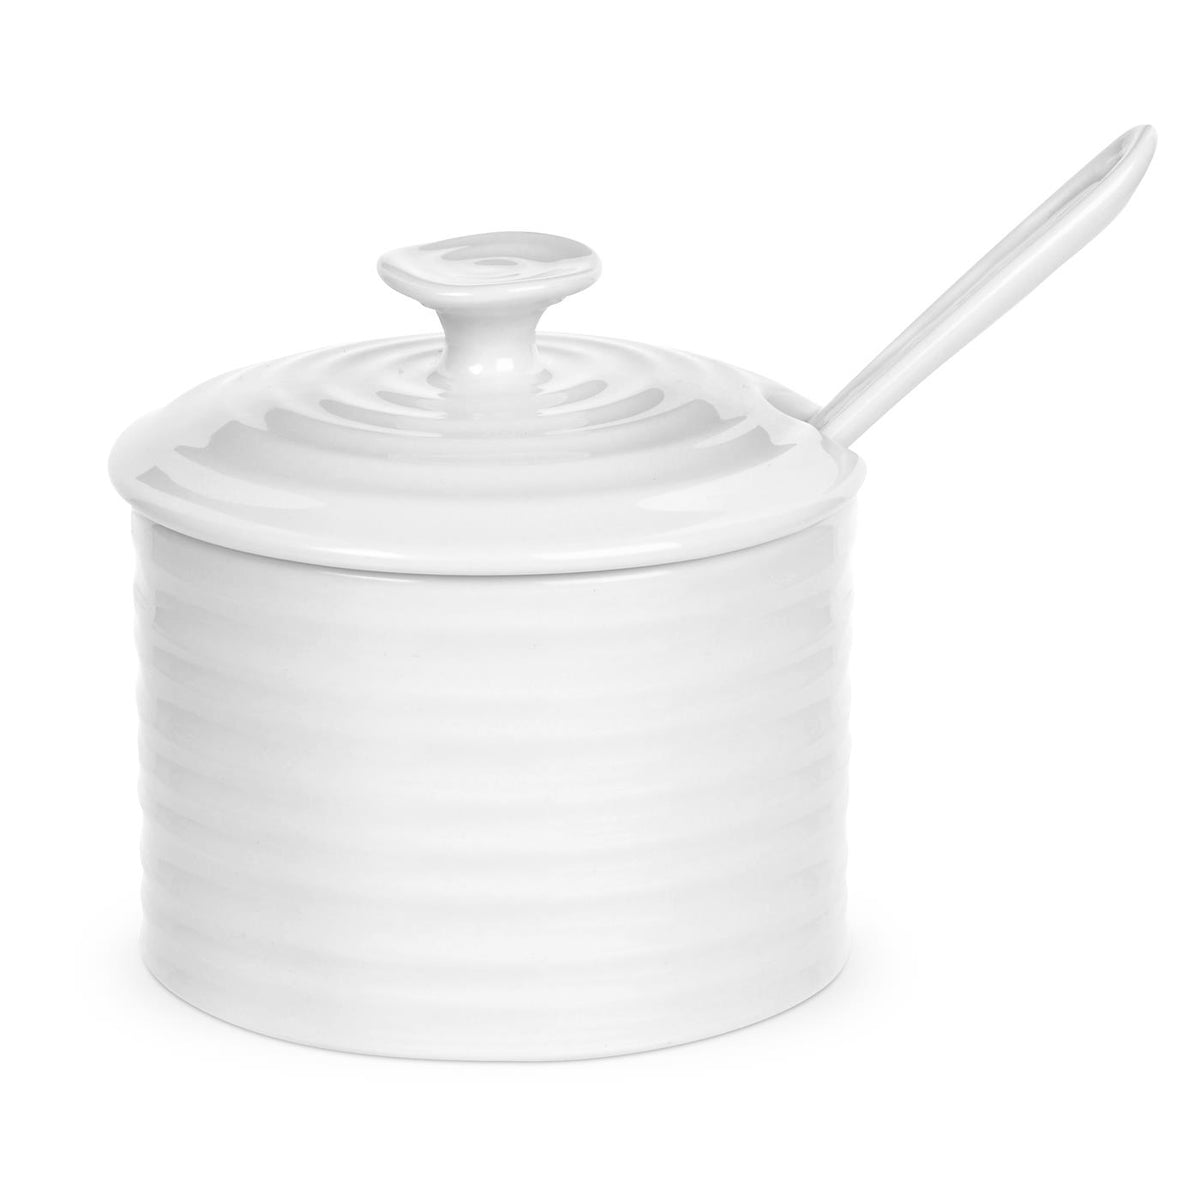 White Conserve Pot with Spoon - RSVP Style